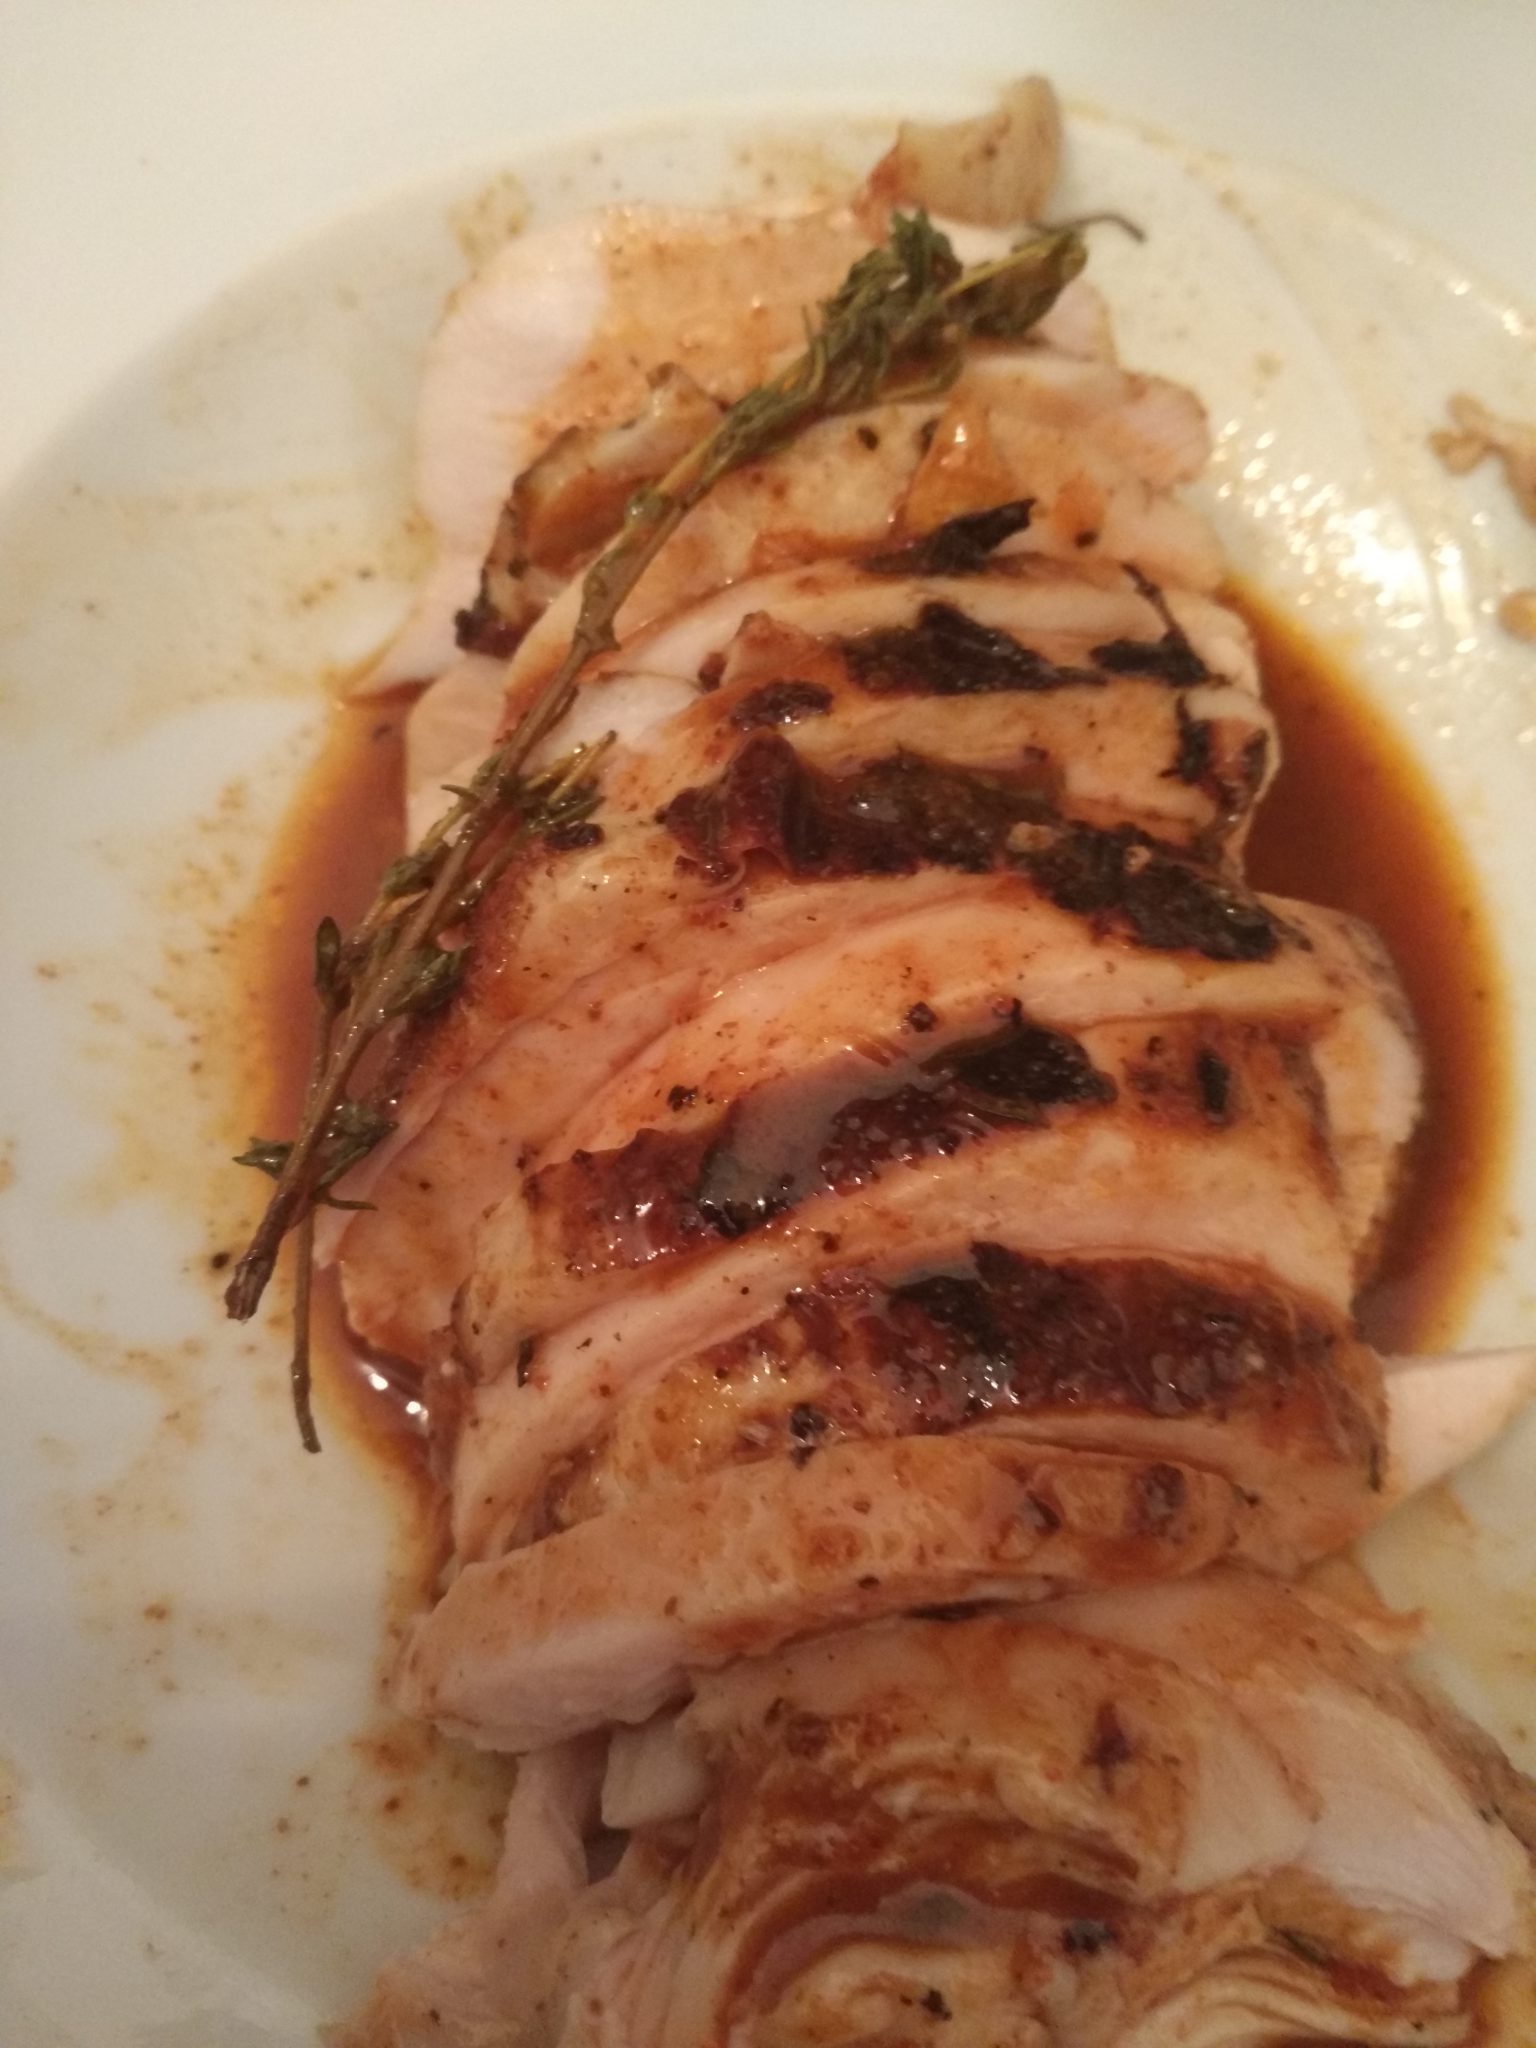 Sous vide chicken breast - a tender and juicy chicken breast recipe